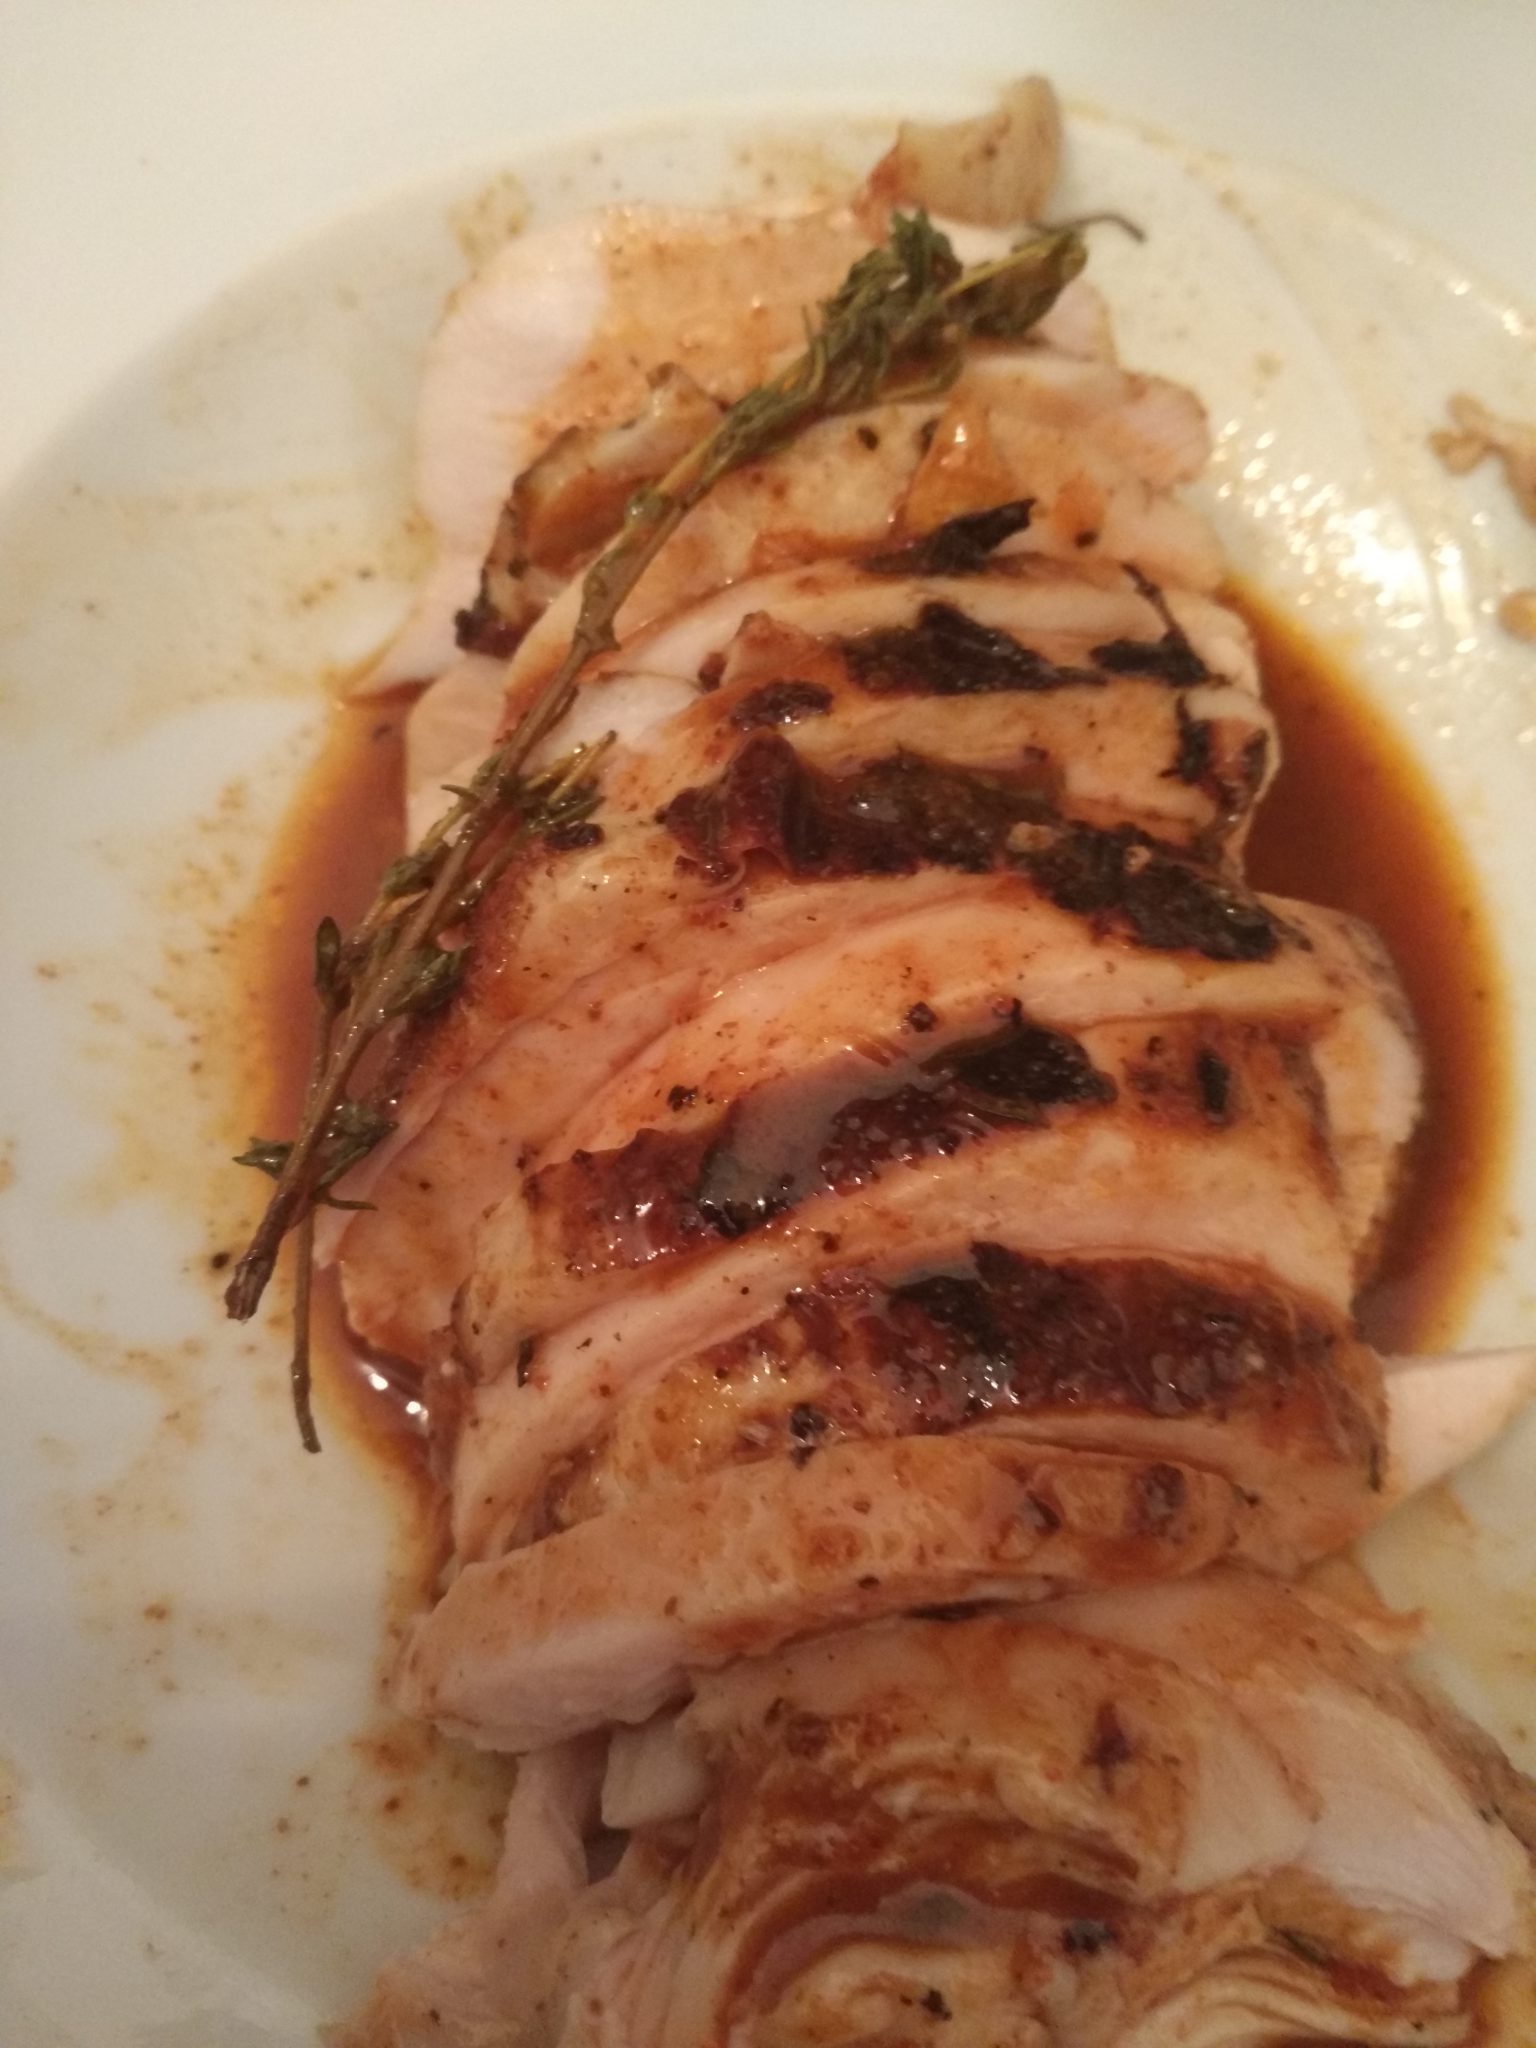 Sous vide chicken breast - a tender and juicy chicken breast recipe